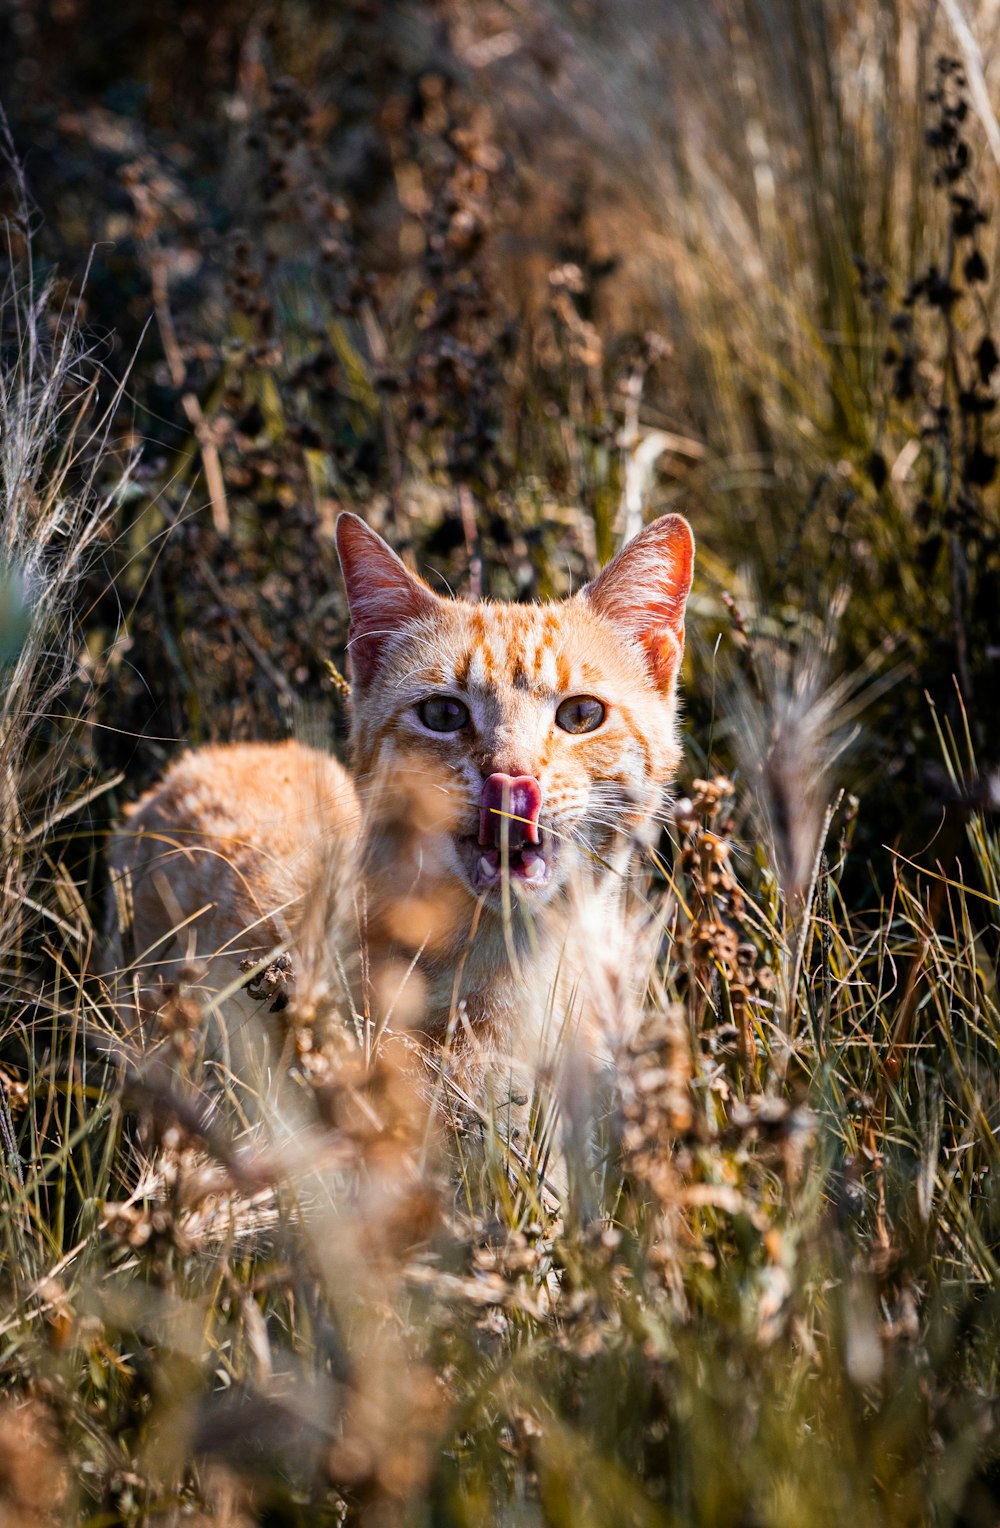 a cat with its mouth open standing in a field